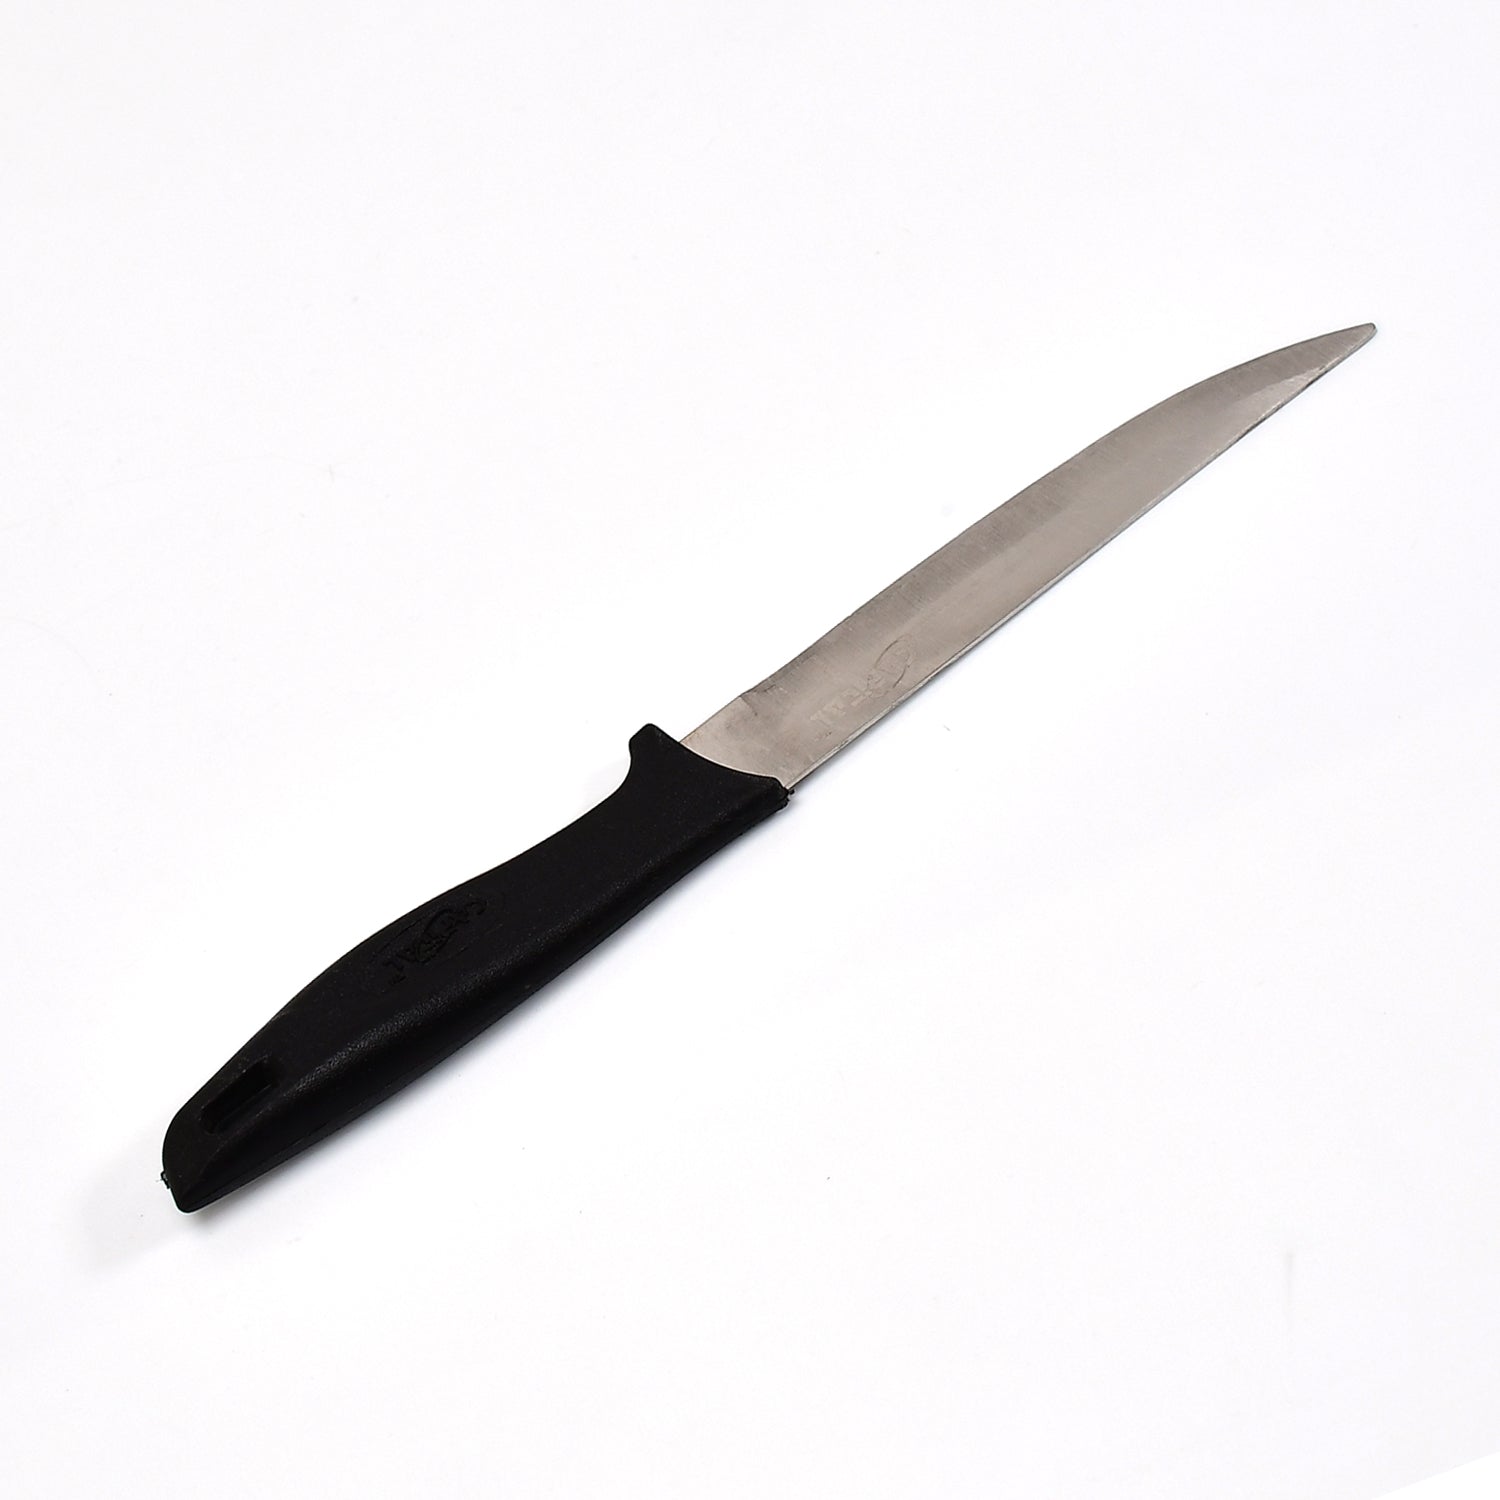 2387 Stainless Steel knife and Kitchen Knife with Black Grip Handle (23.5 Cm )